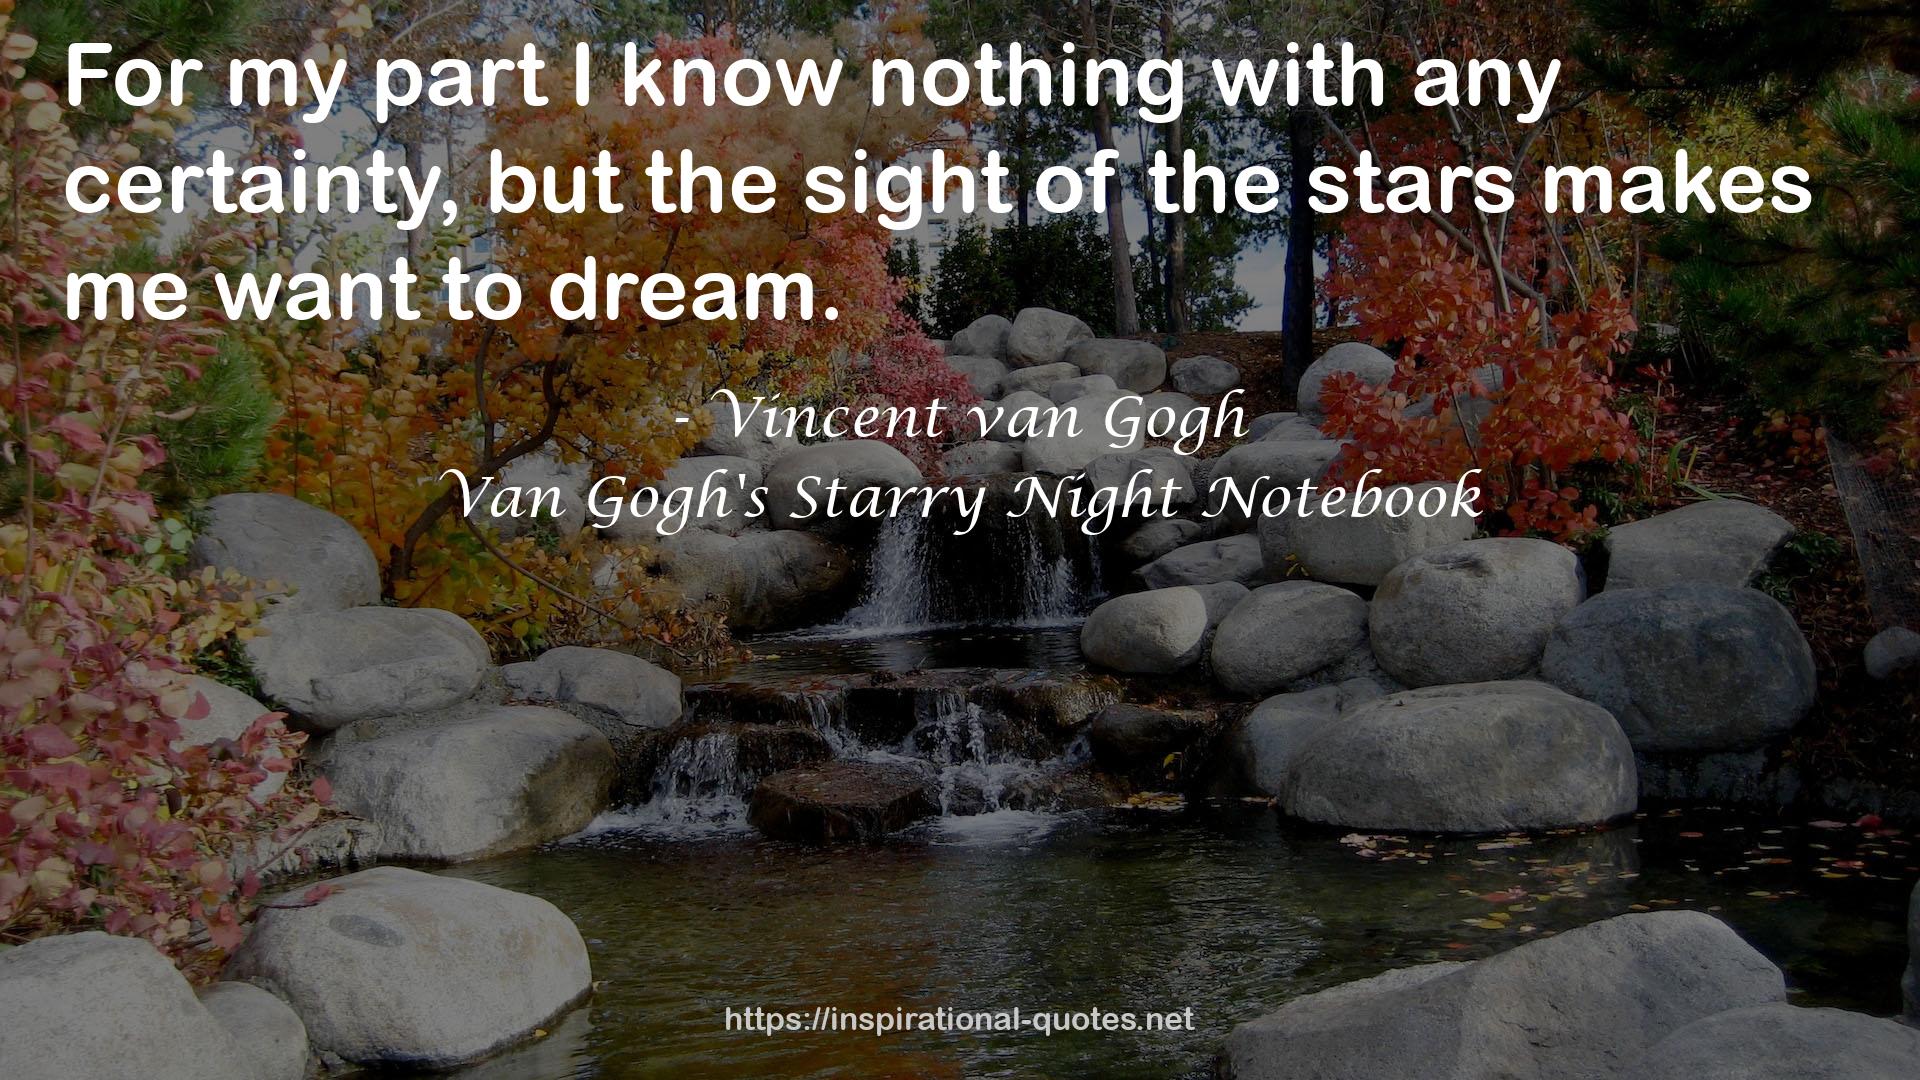 Van Gogh's Starry Night Notebook QUOTES